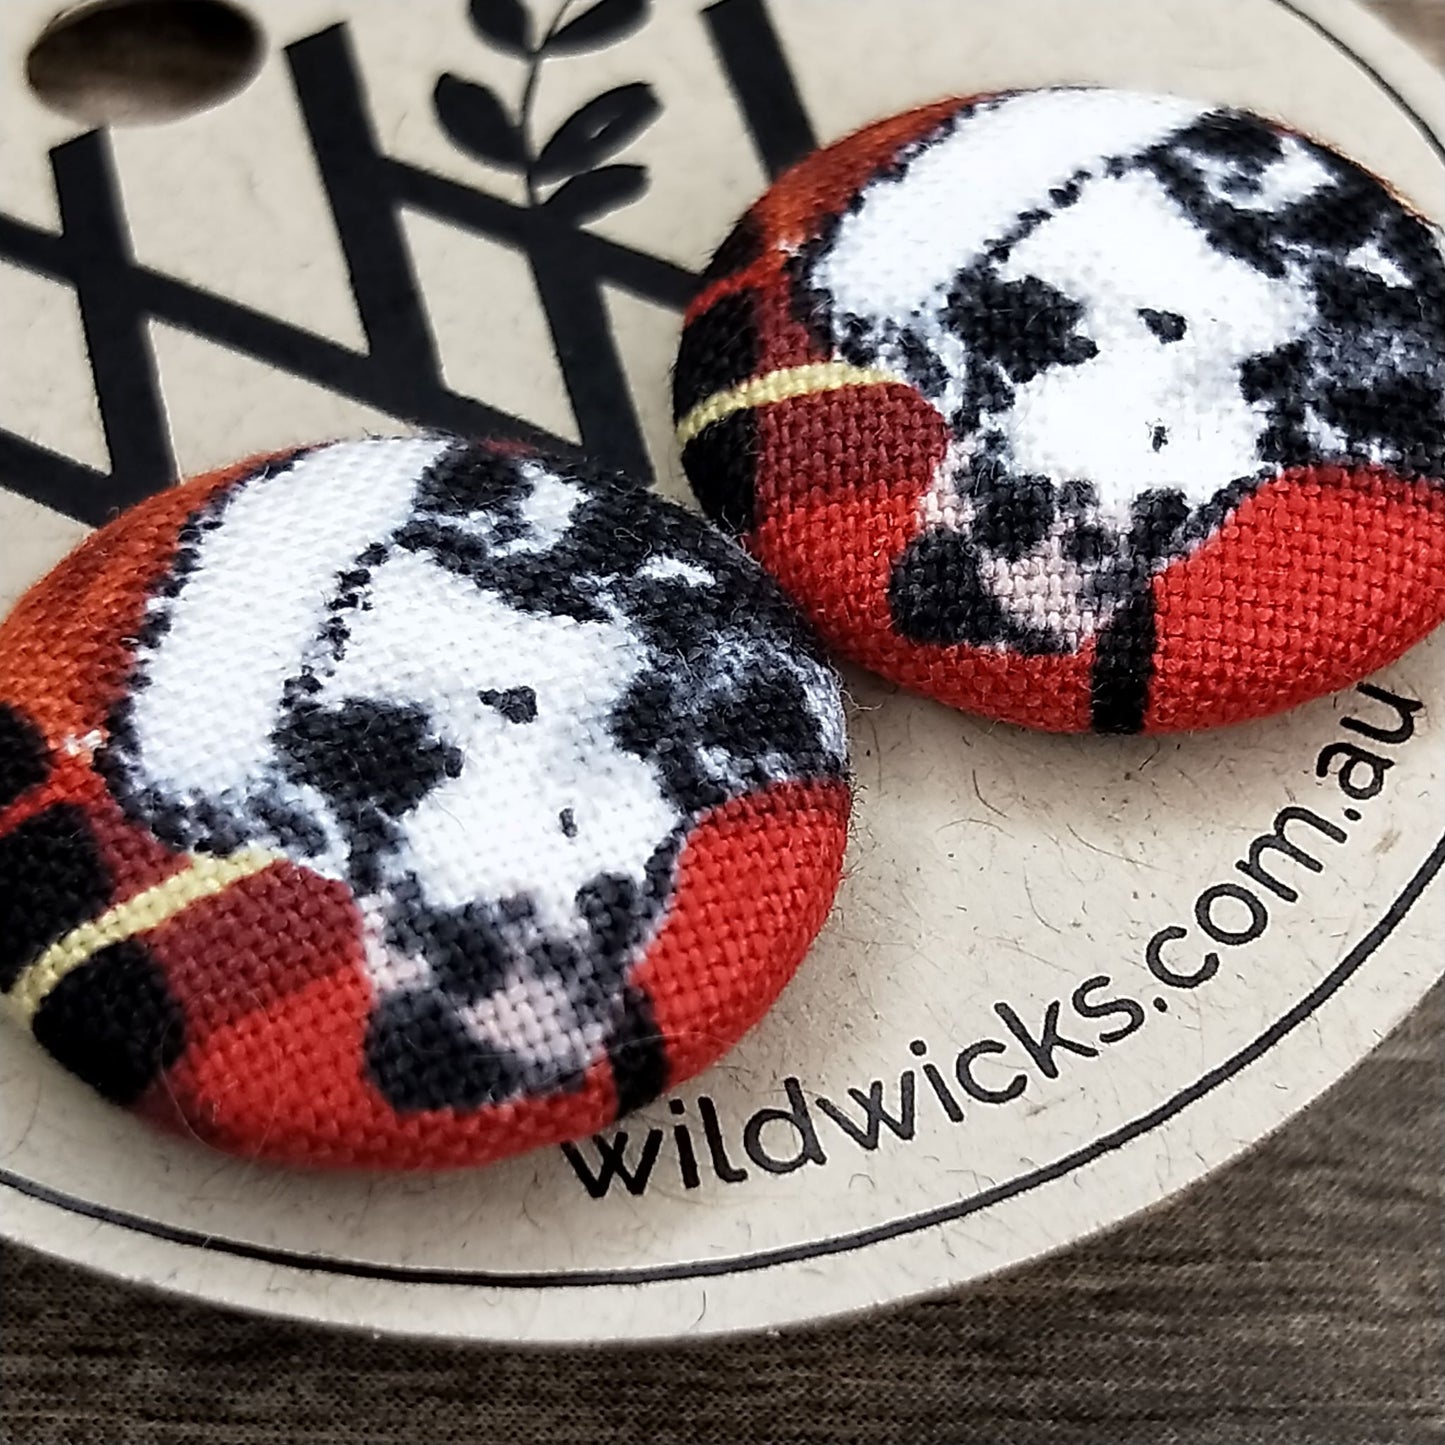 Wildears Fabric Covered Button Earrings Christmas Dogs 5 19mm